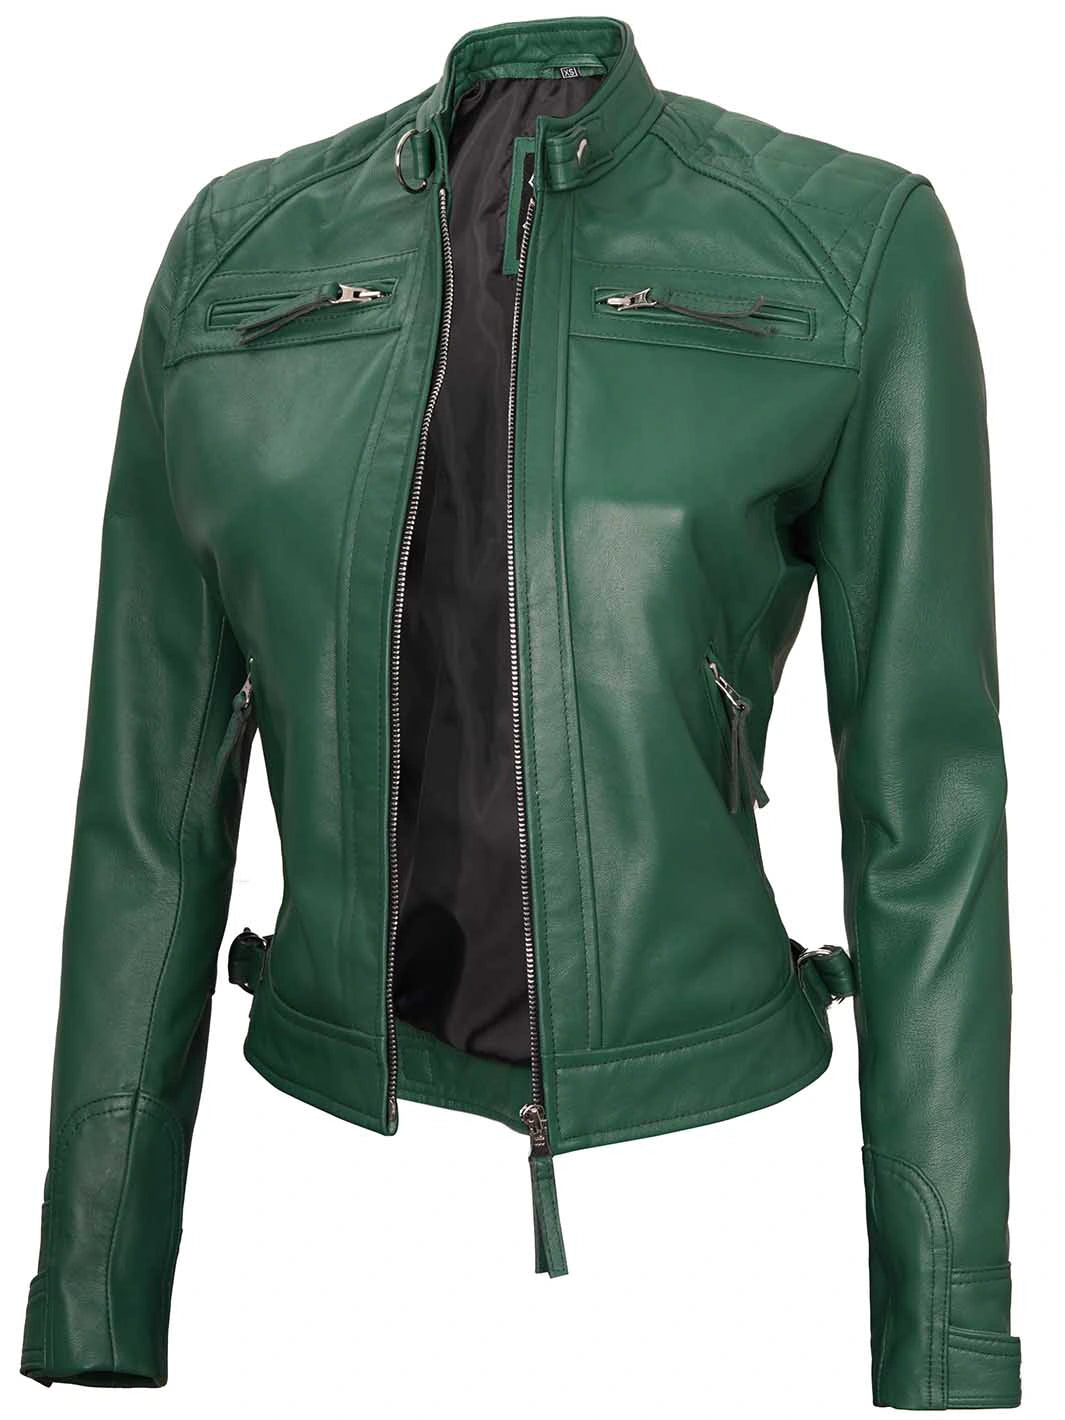 Green leather jacket for women